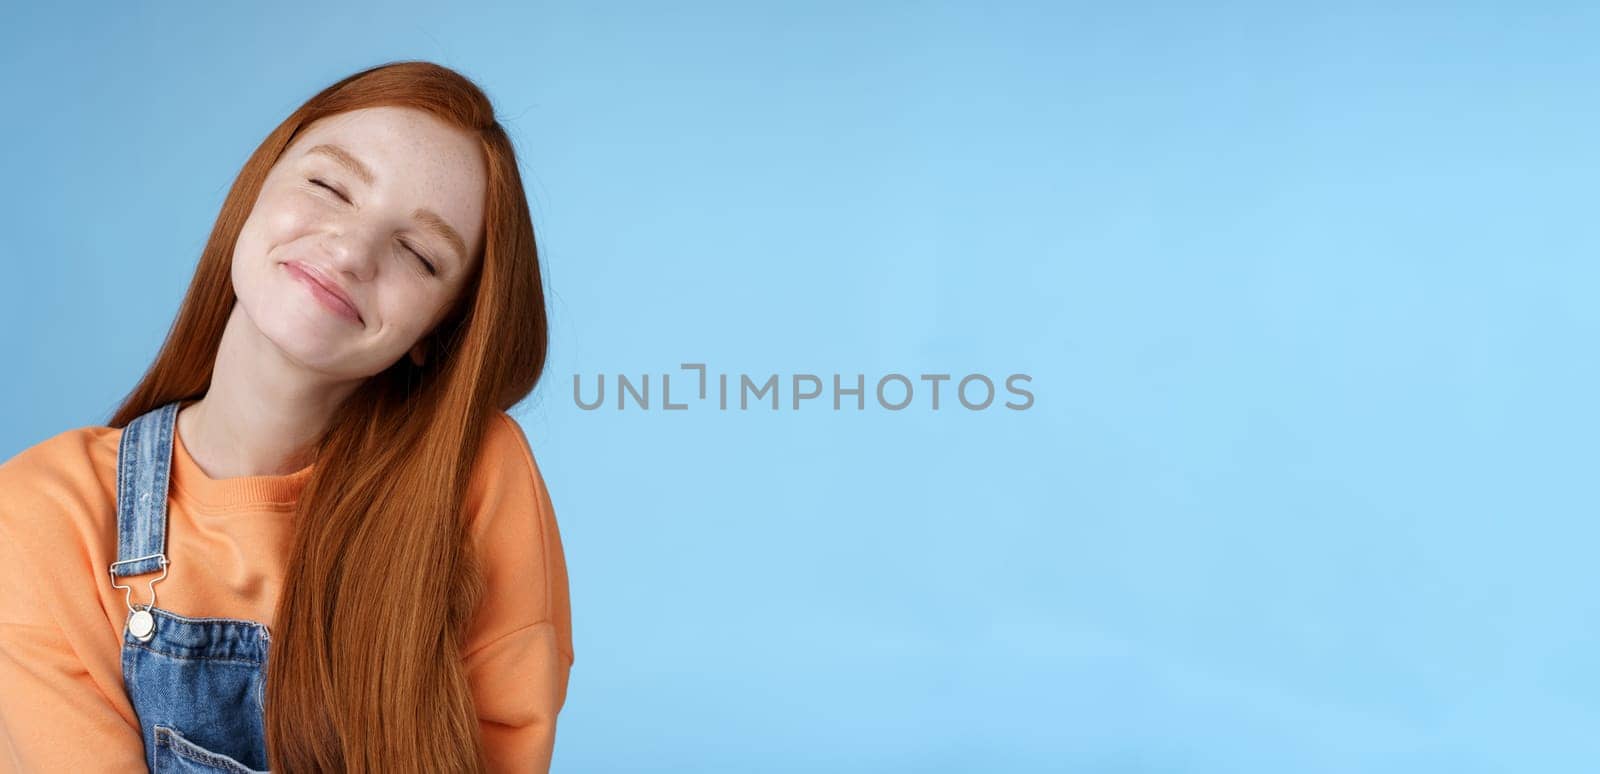 Dreamy kind silly redhead smiling happy girl straight long ginger hair daydreaming imagine romantic moment close eyes smiling delighted tilting head look joyful, standing blue background by Benzoix